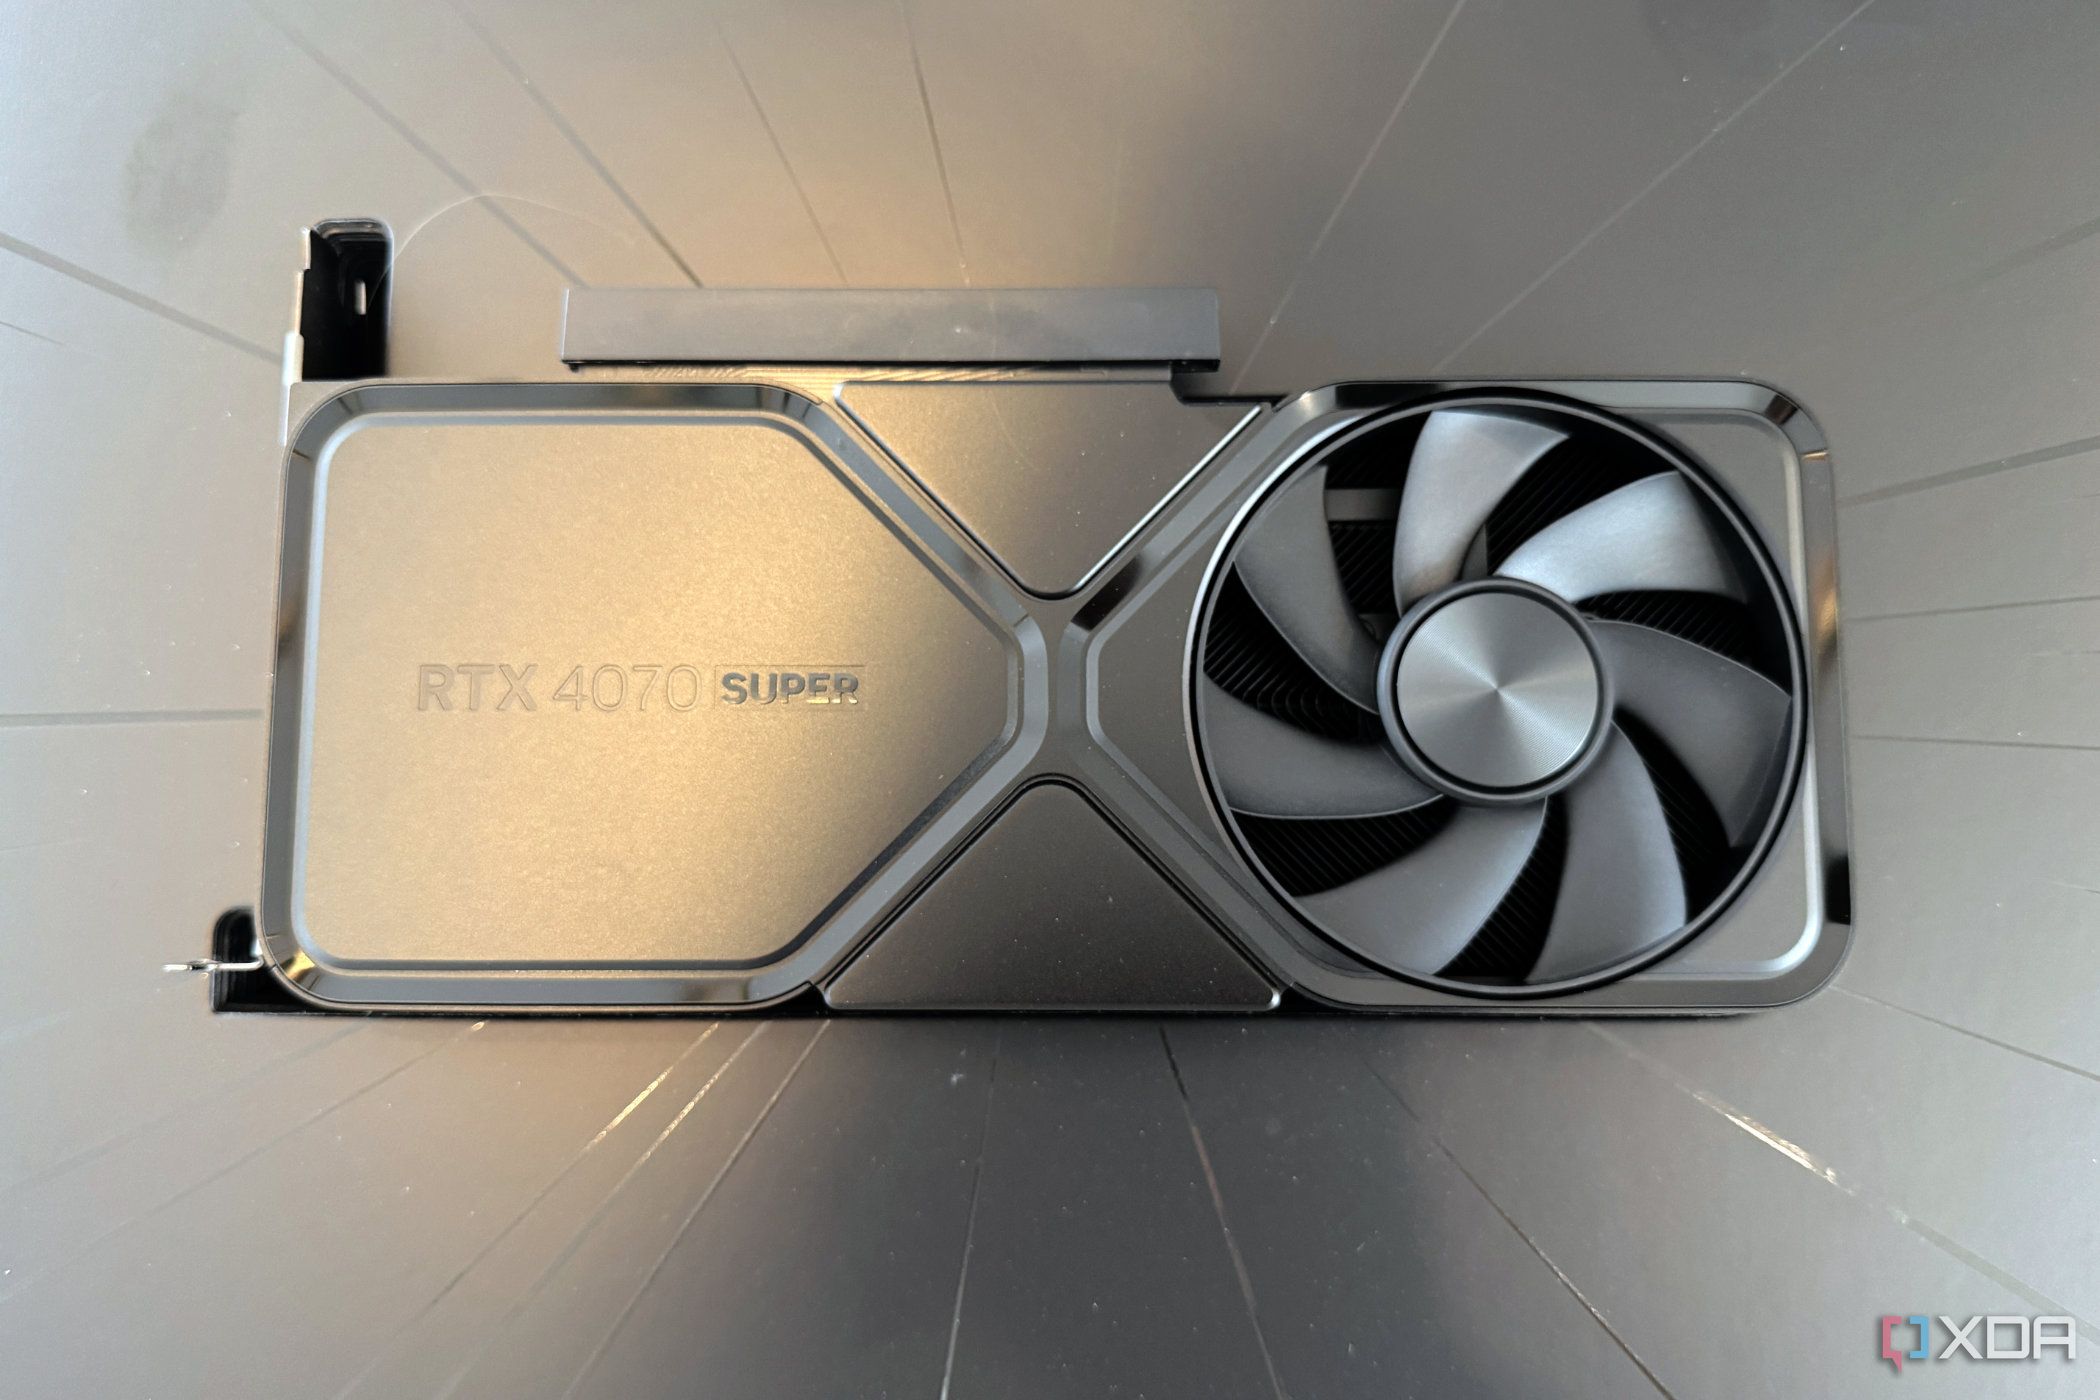 nvidia geforce rtx 4070 super founders edition in nvidia packaging